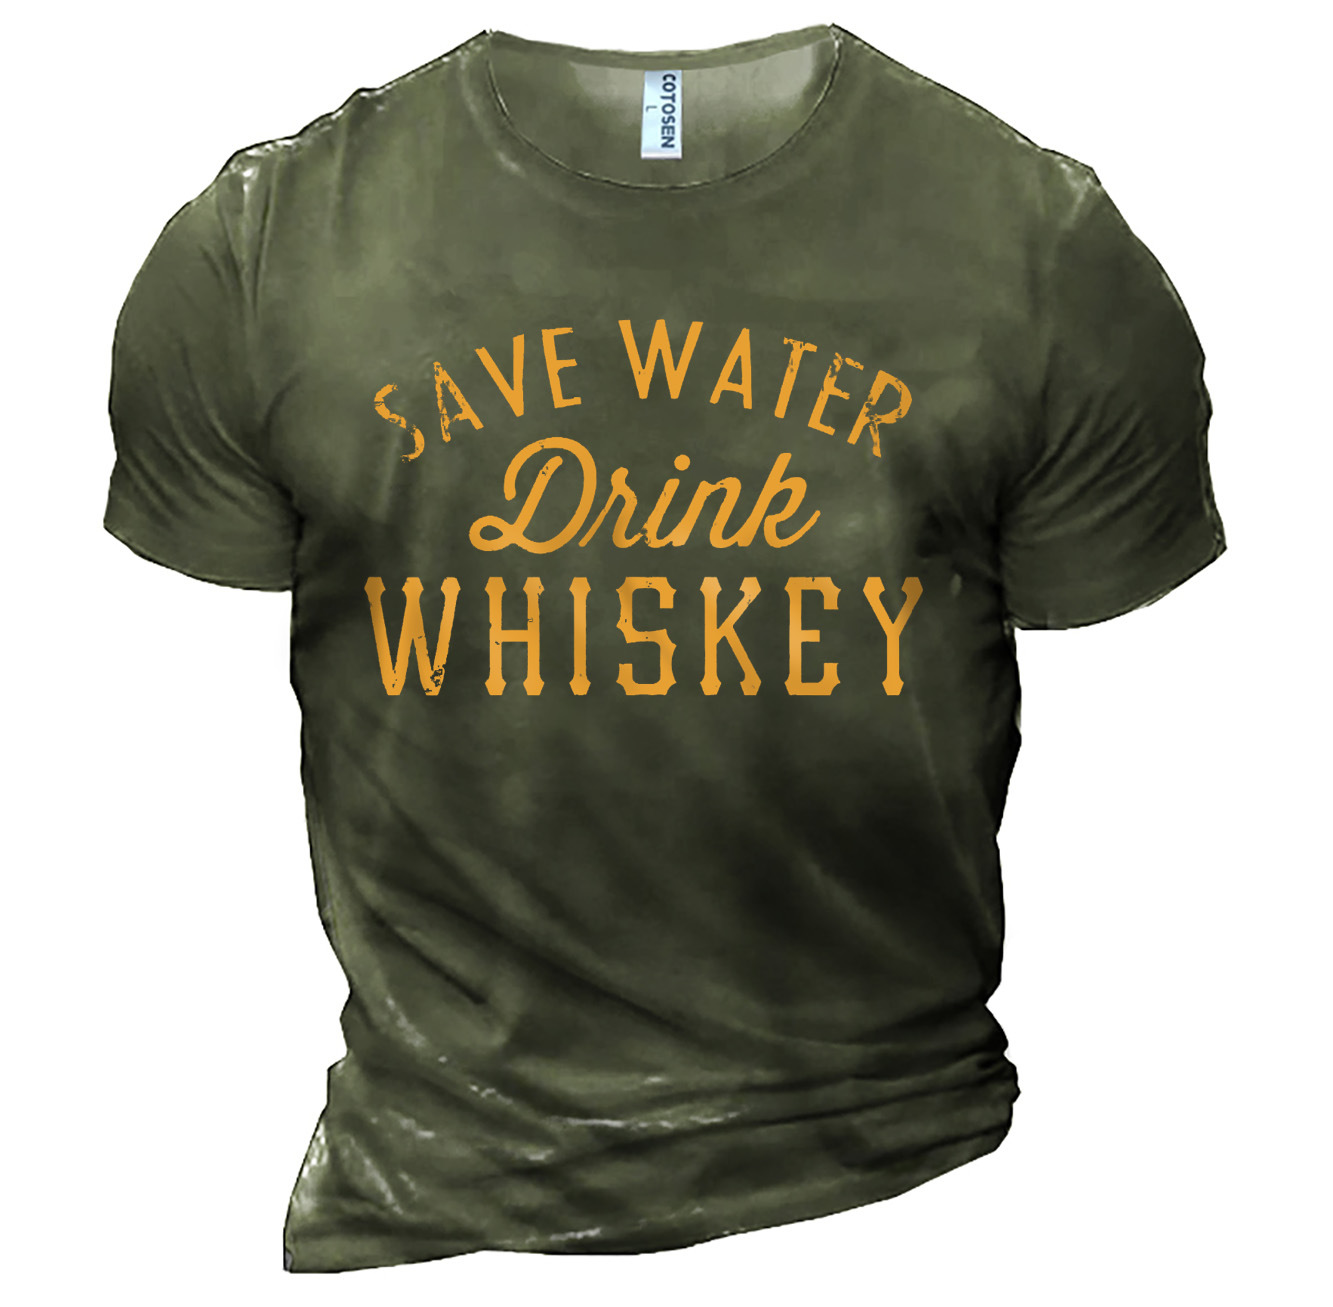 Men's Save Water Drink Chic Whiskey Print Cotton T-shirt